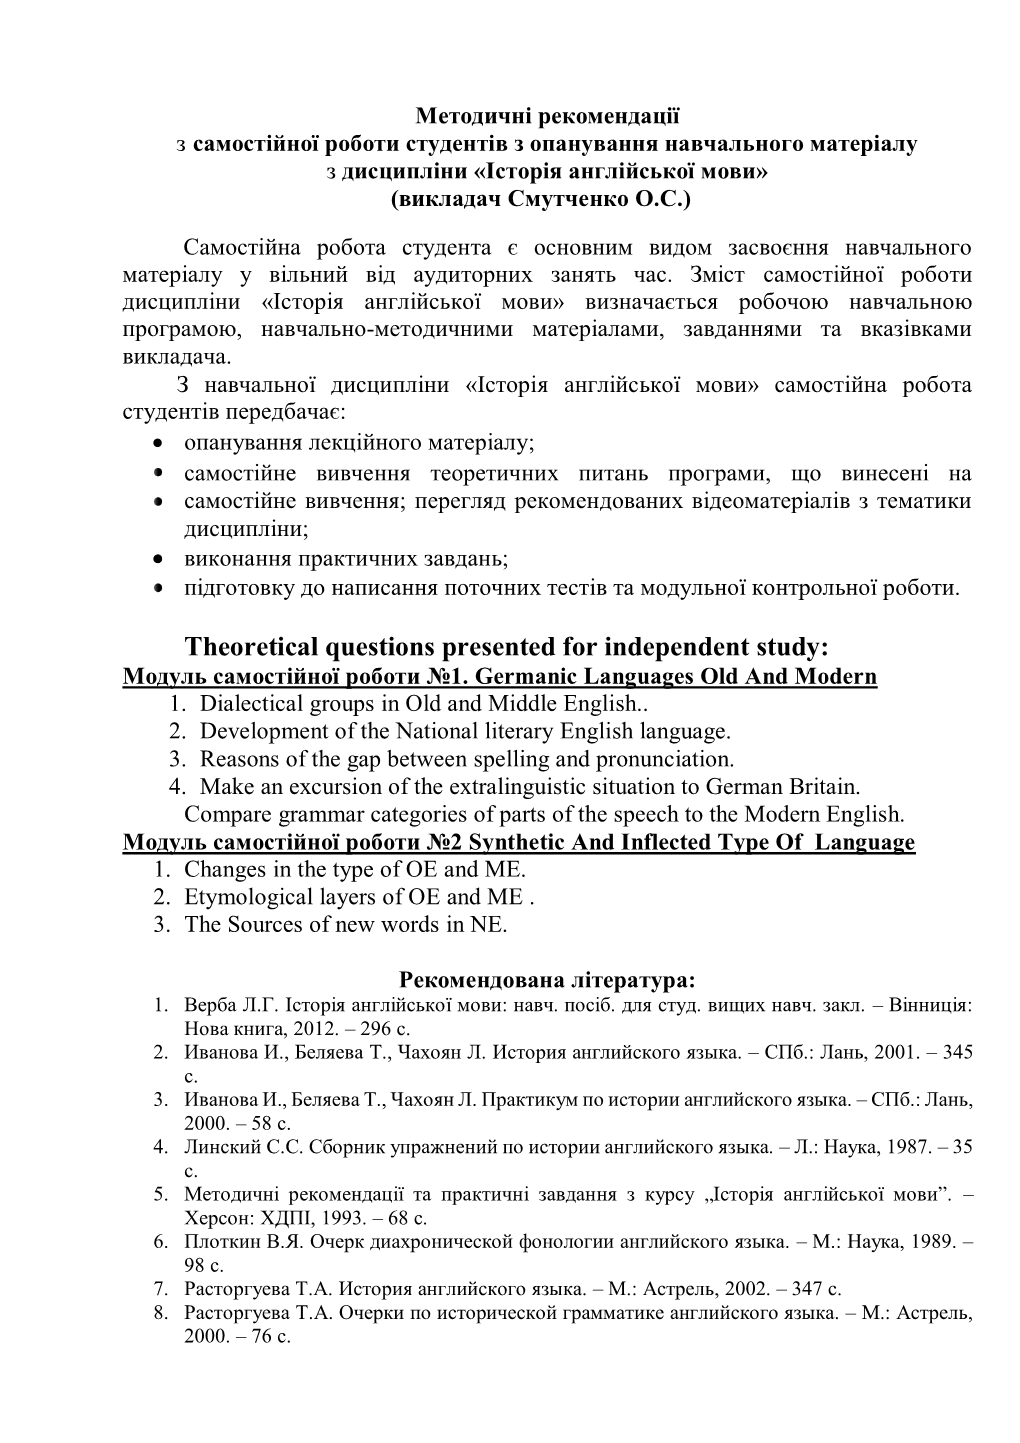 Theoretical Questions Presented for Independent Study: Модуль Самостійної Роботи №1